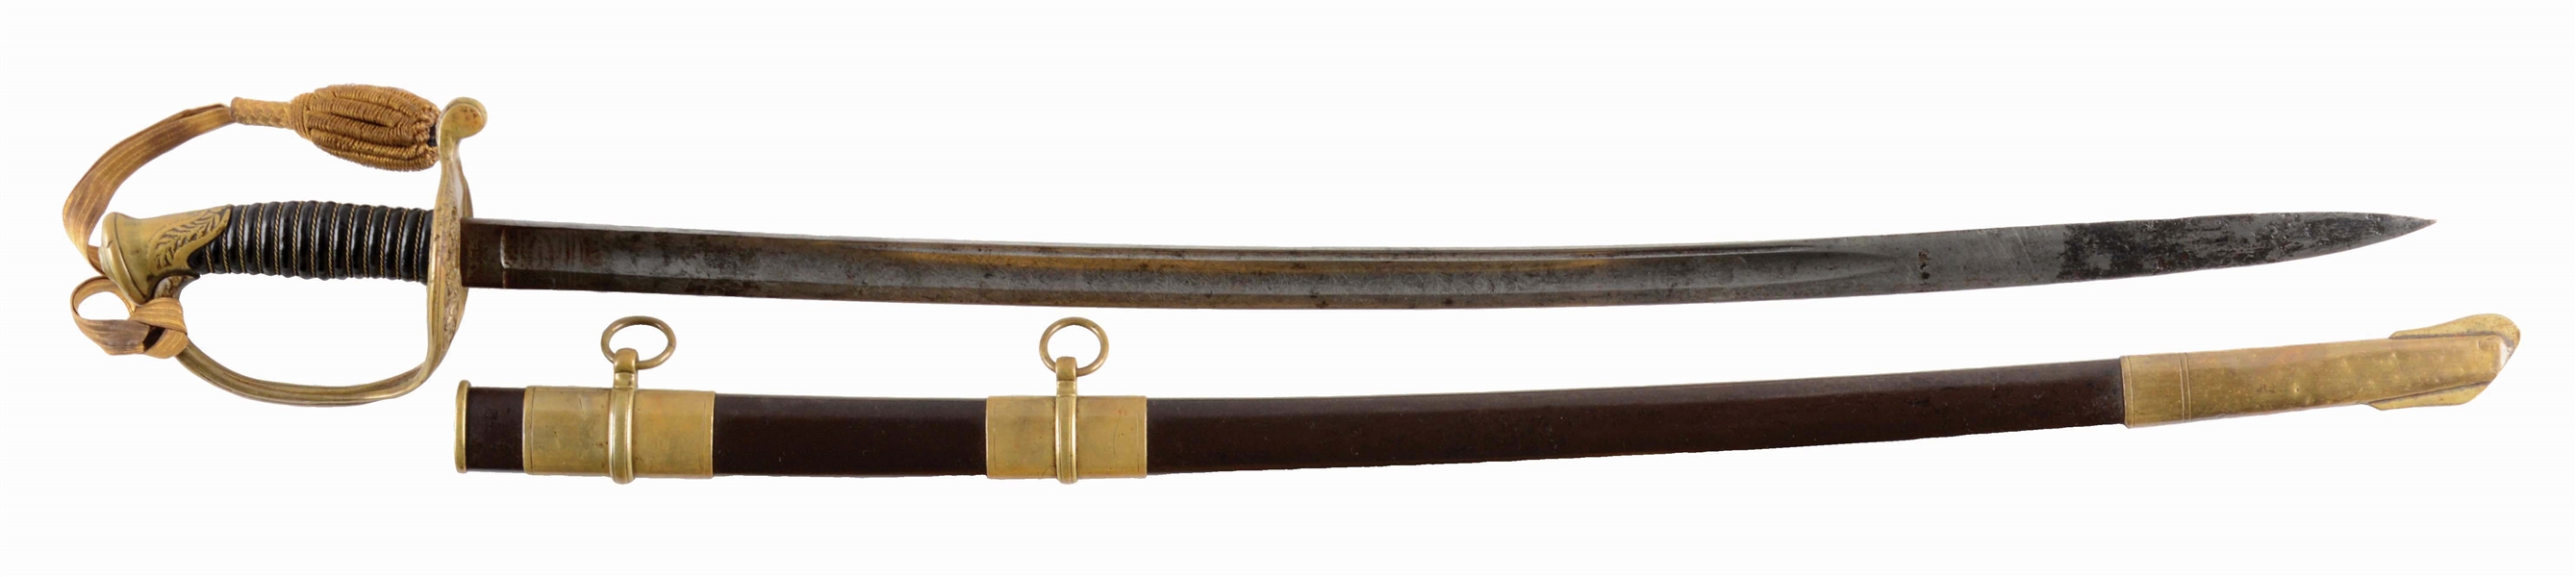 A RARE AND DESIRABLE CIVIL WAR U.S.M.C. OFFICERS SWORD OF FOOT OFFICER PATTERN.